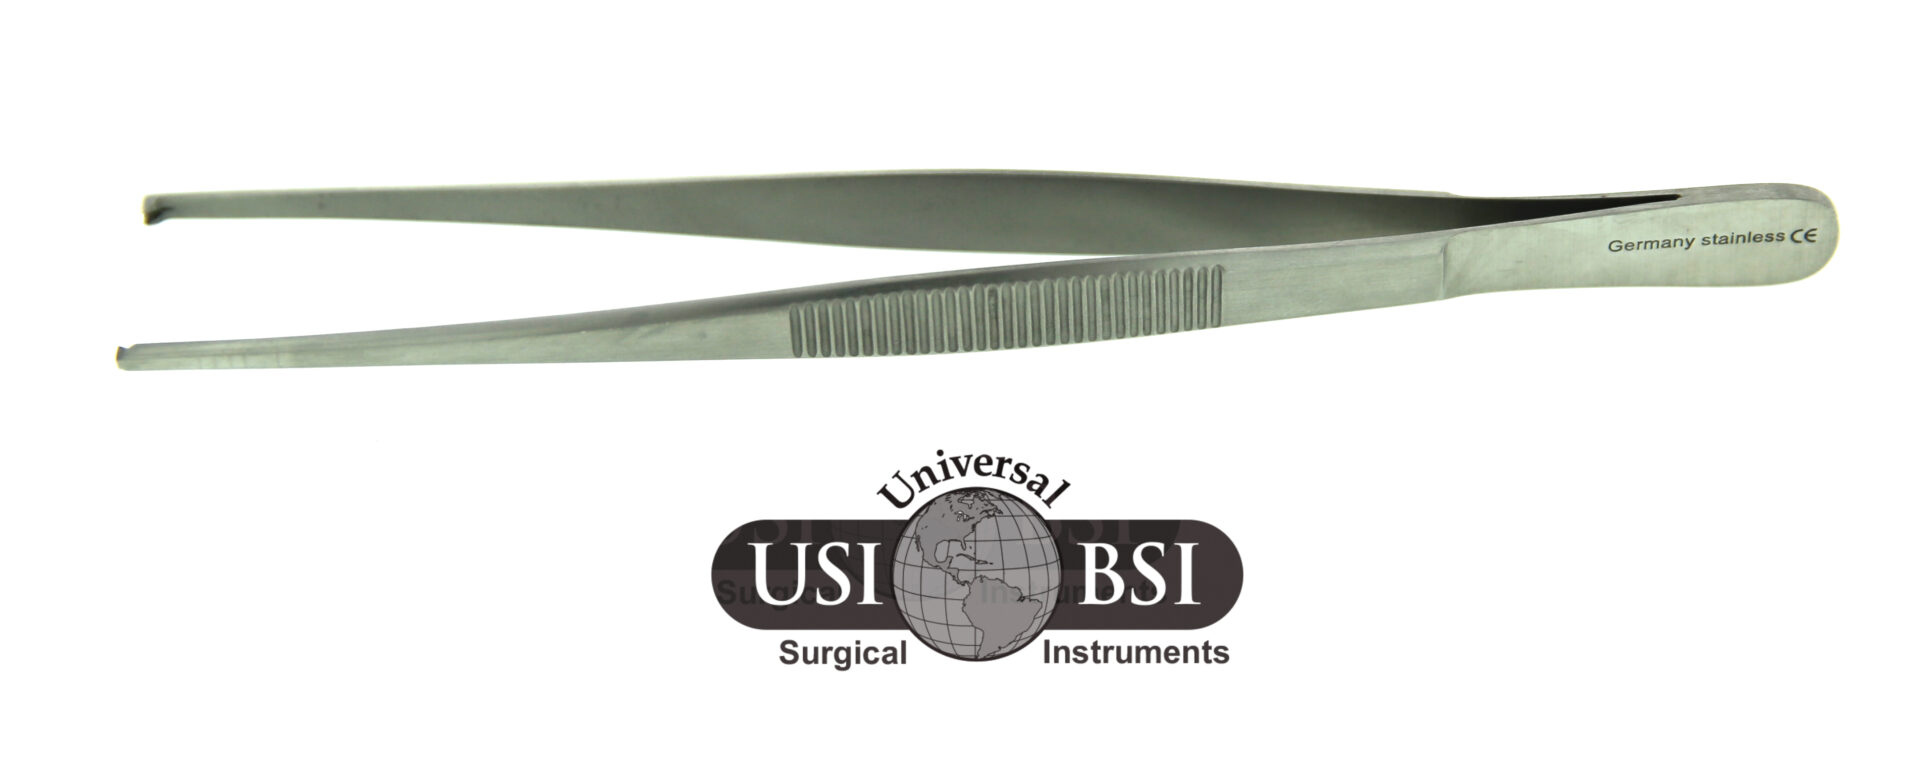 A close up of a pair of scissors with the logo for universal surgical instruments.